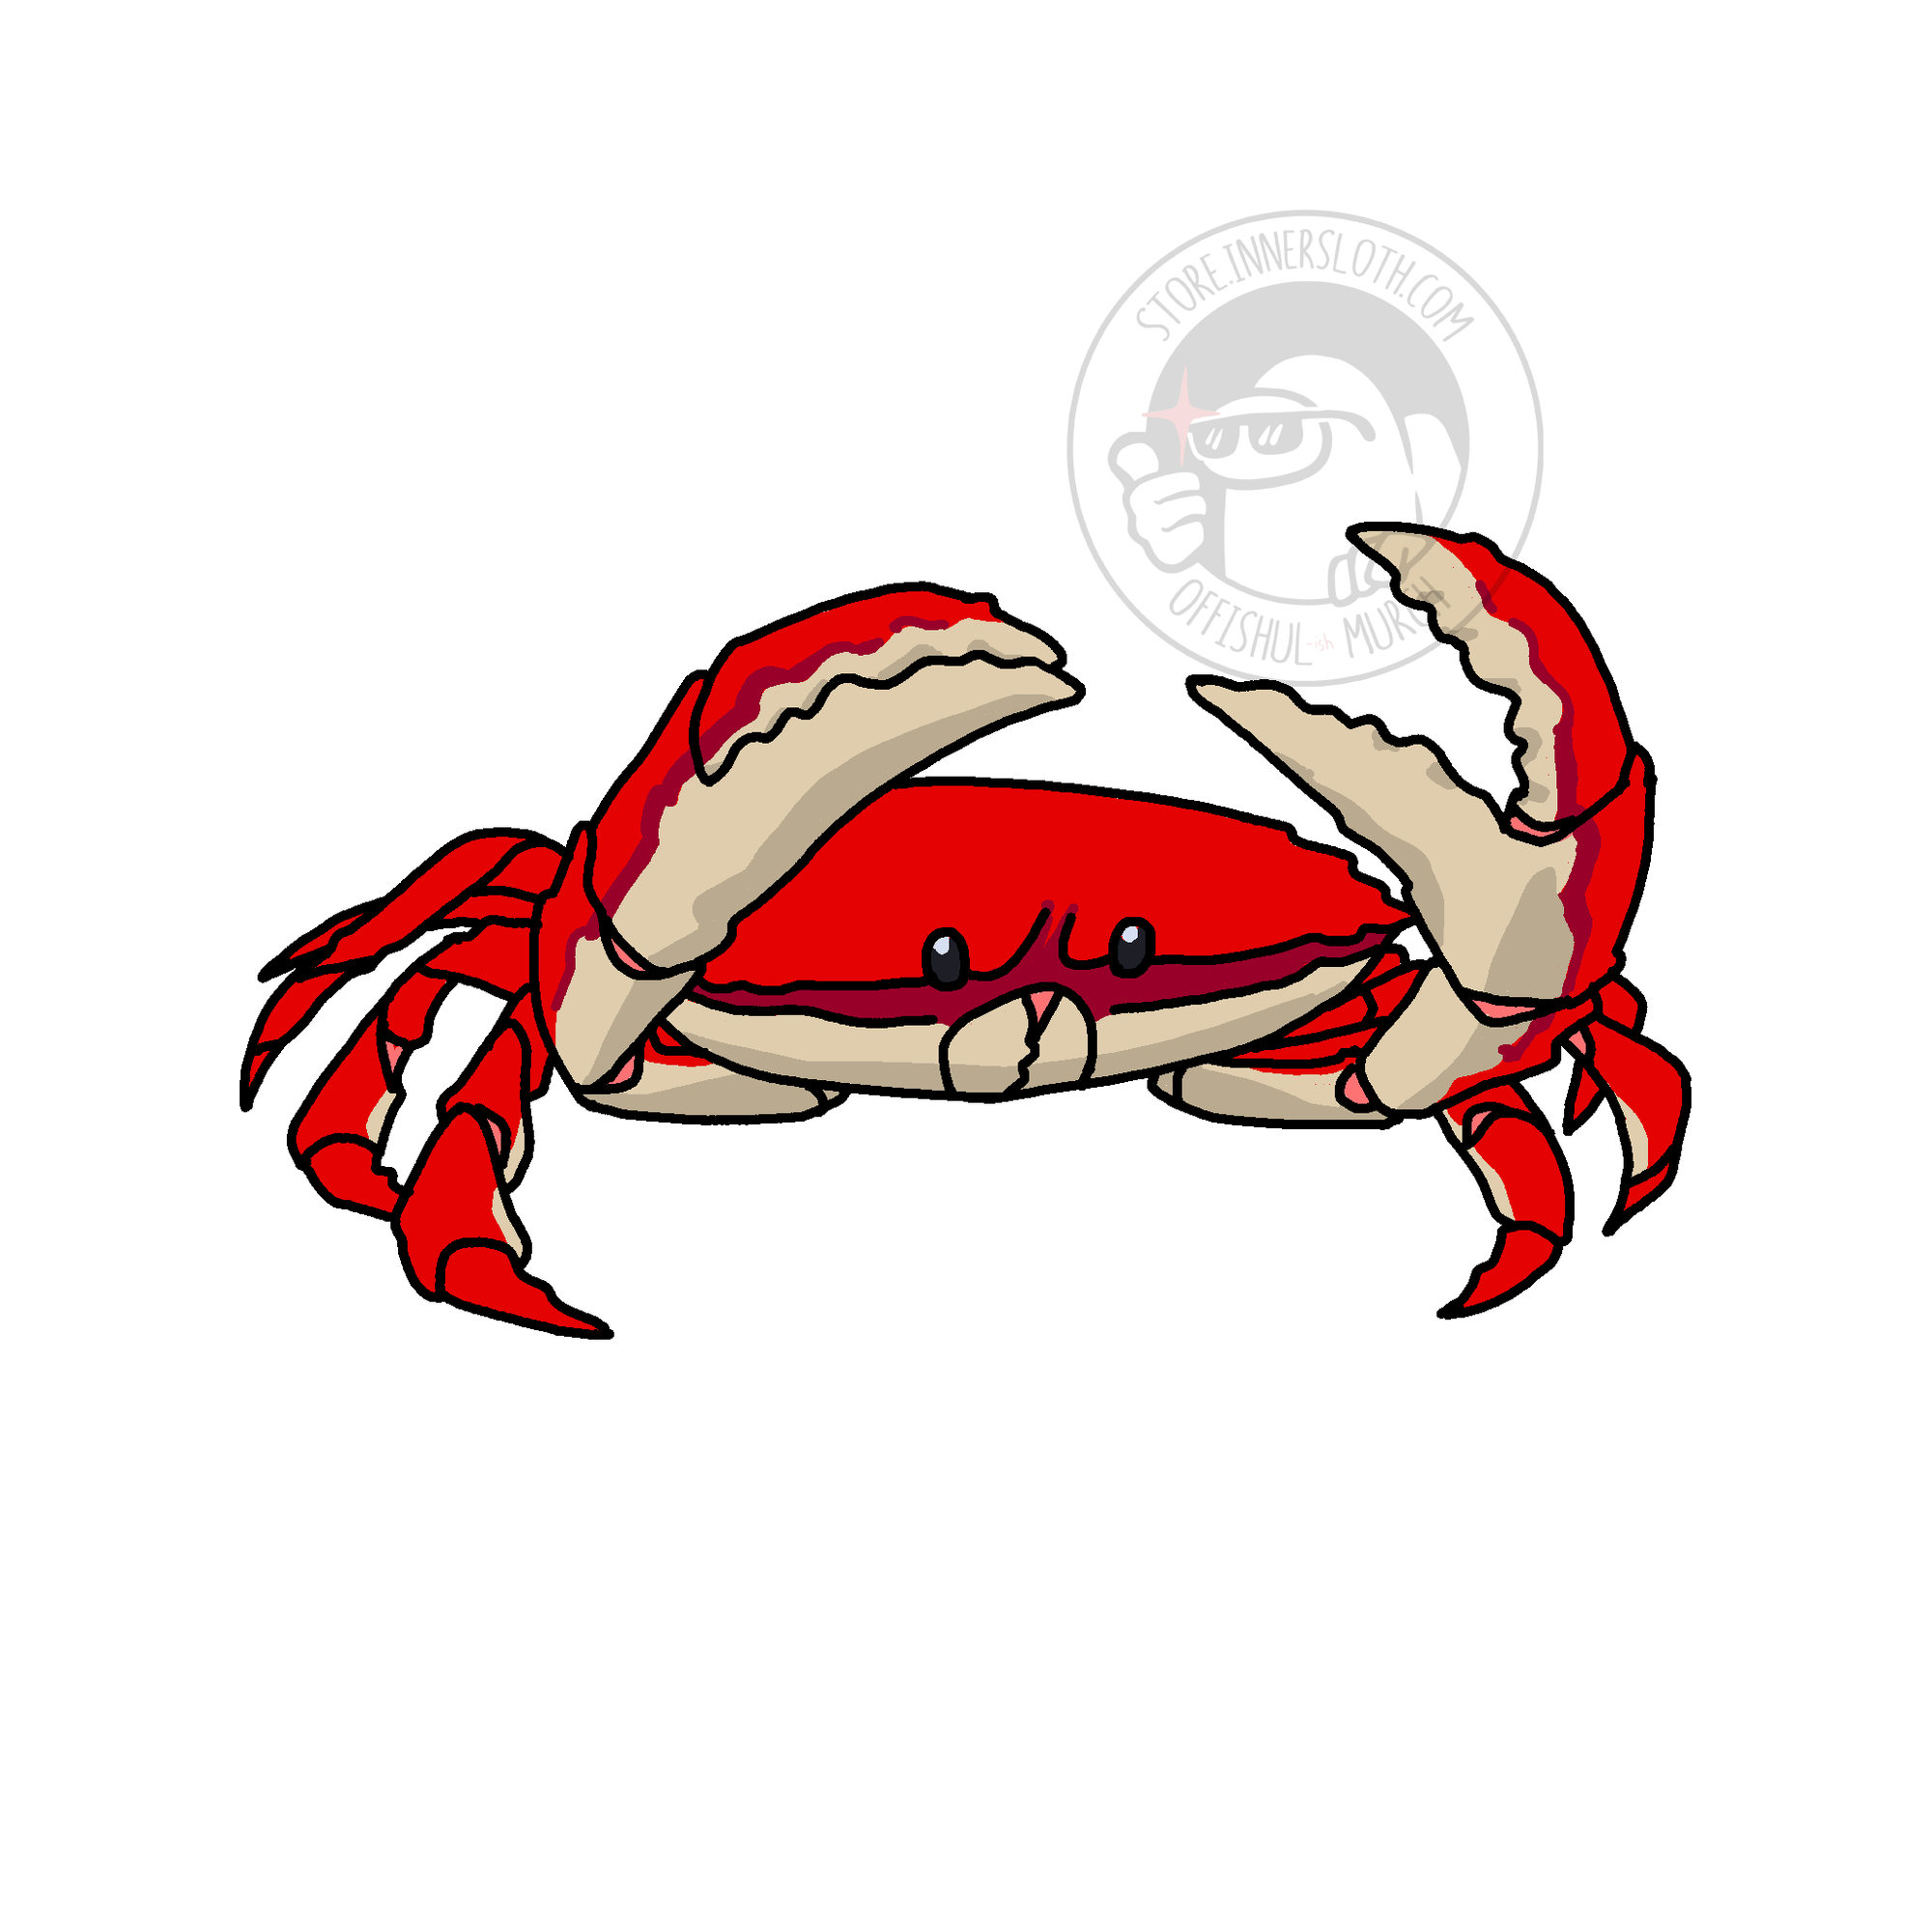  A colored illustration of a red crab, referred to as creb, by Jemma Salume